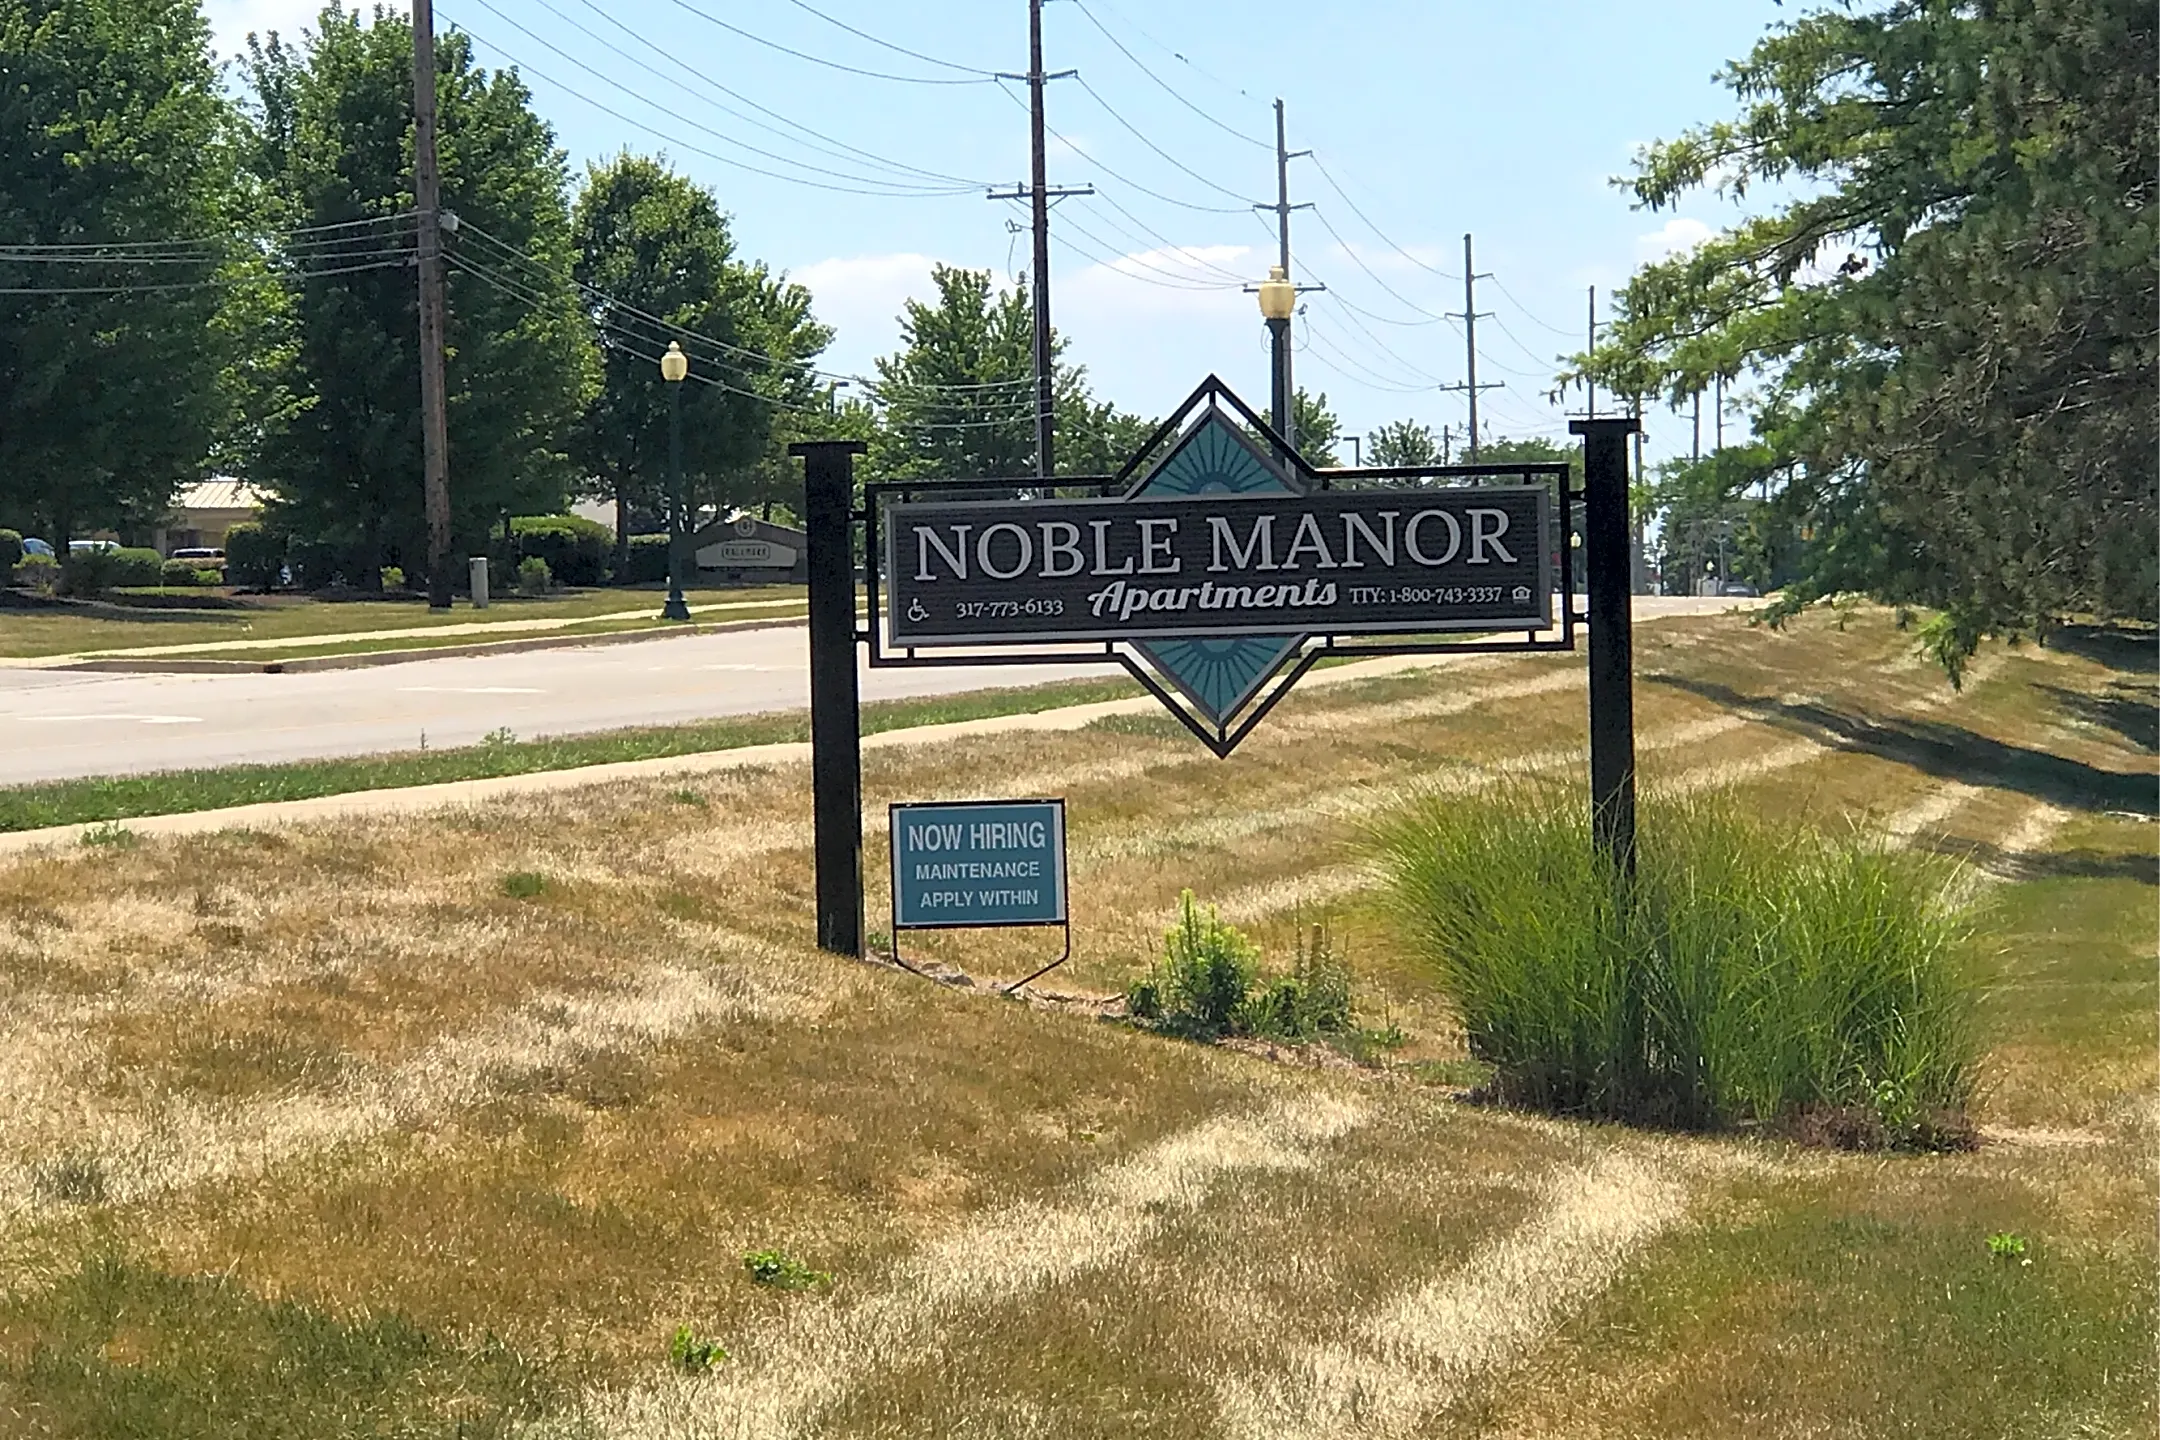 Pool - Noble Manor Apartments - Noblesville, IN